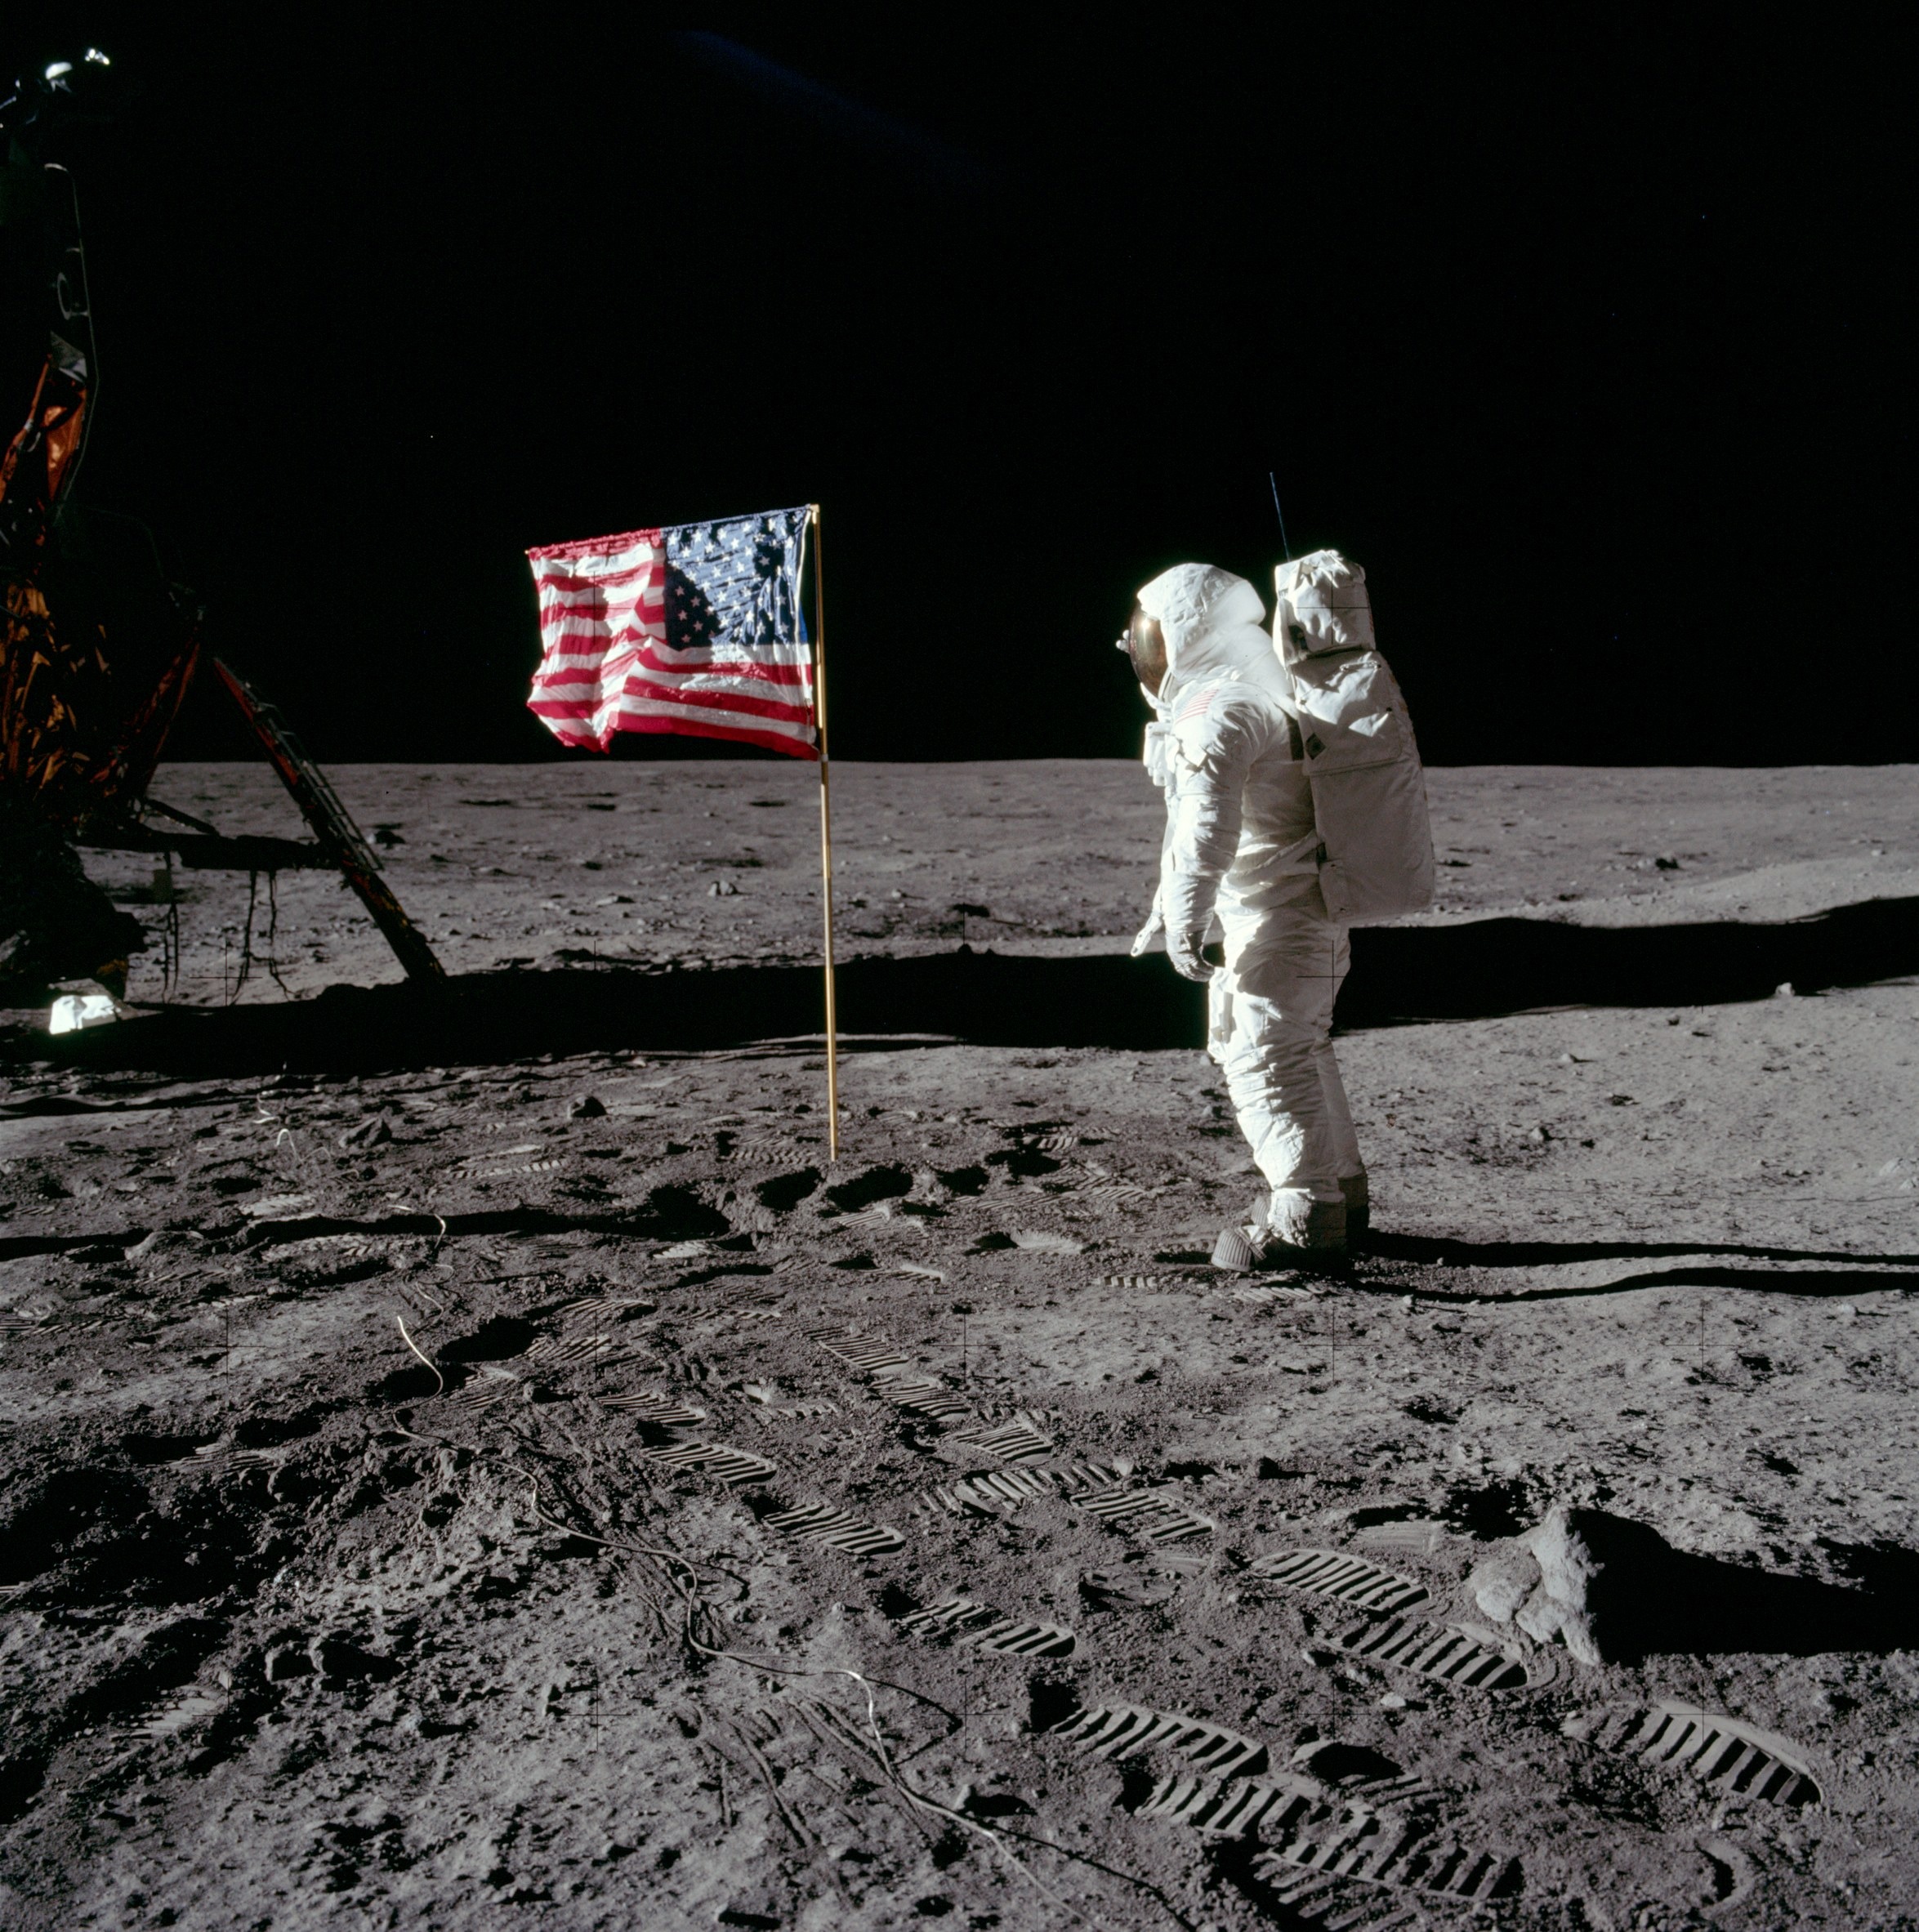 astronaut on moon in front of American flag photo, moon landing